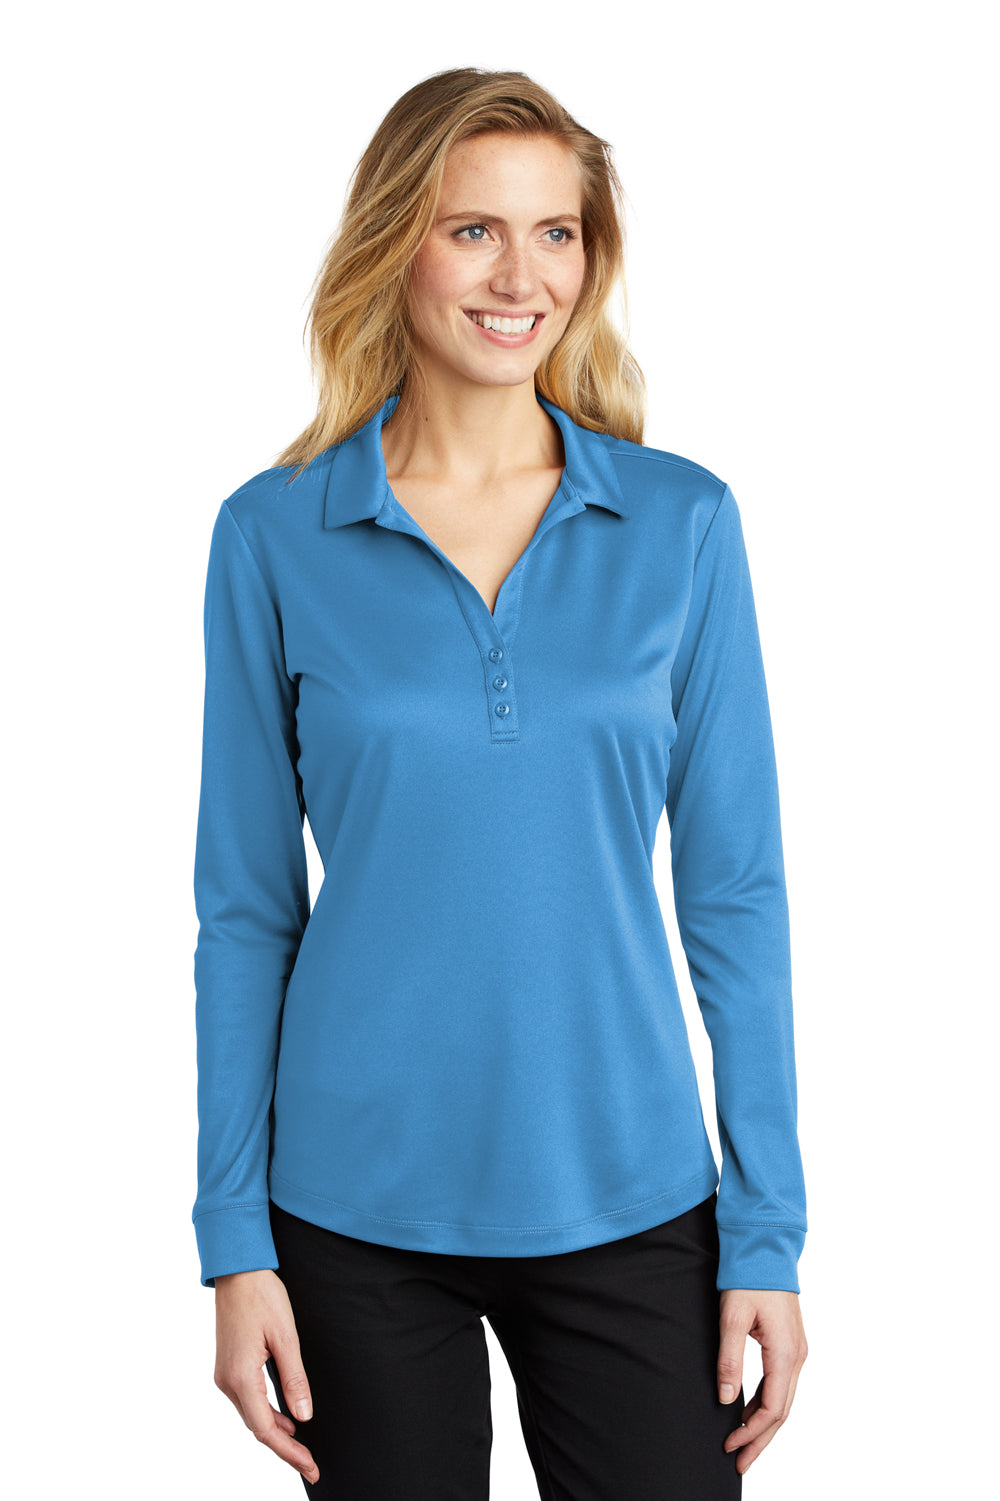 Port Authority Womens Silk Touch Performance Moisture Wicking Long Sleeve Polo Shirt Carolina Blue Front